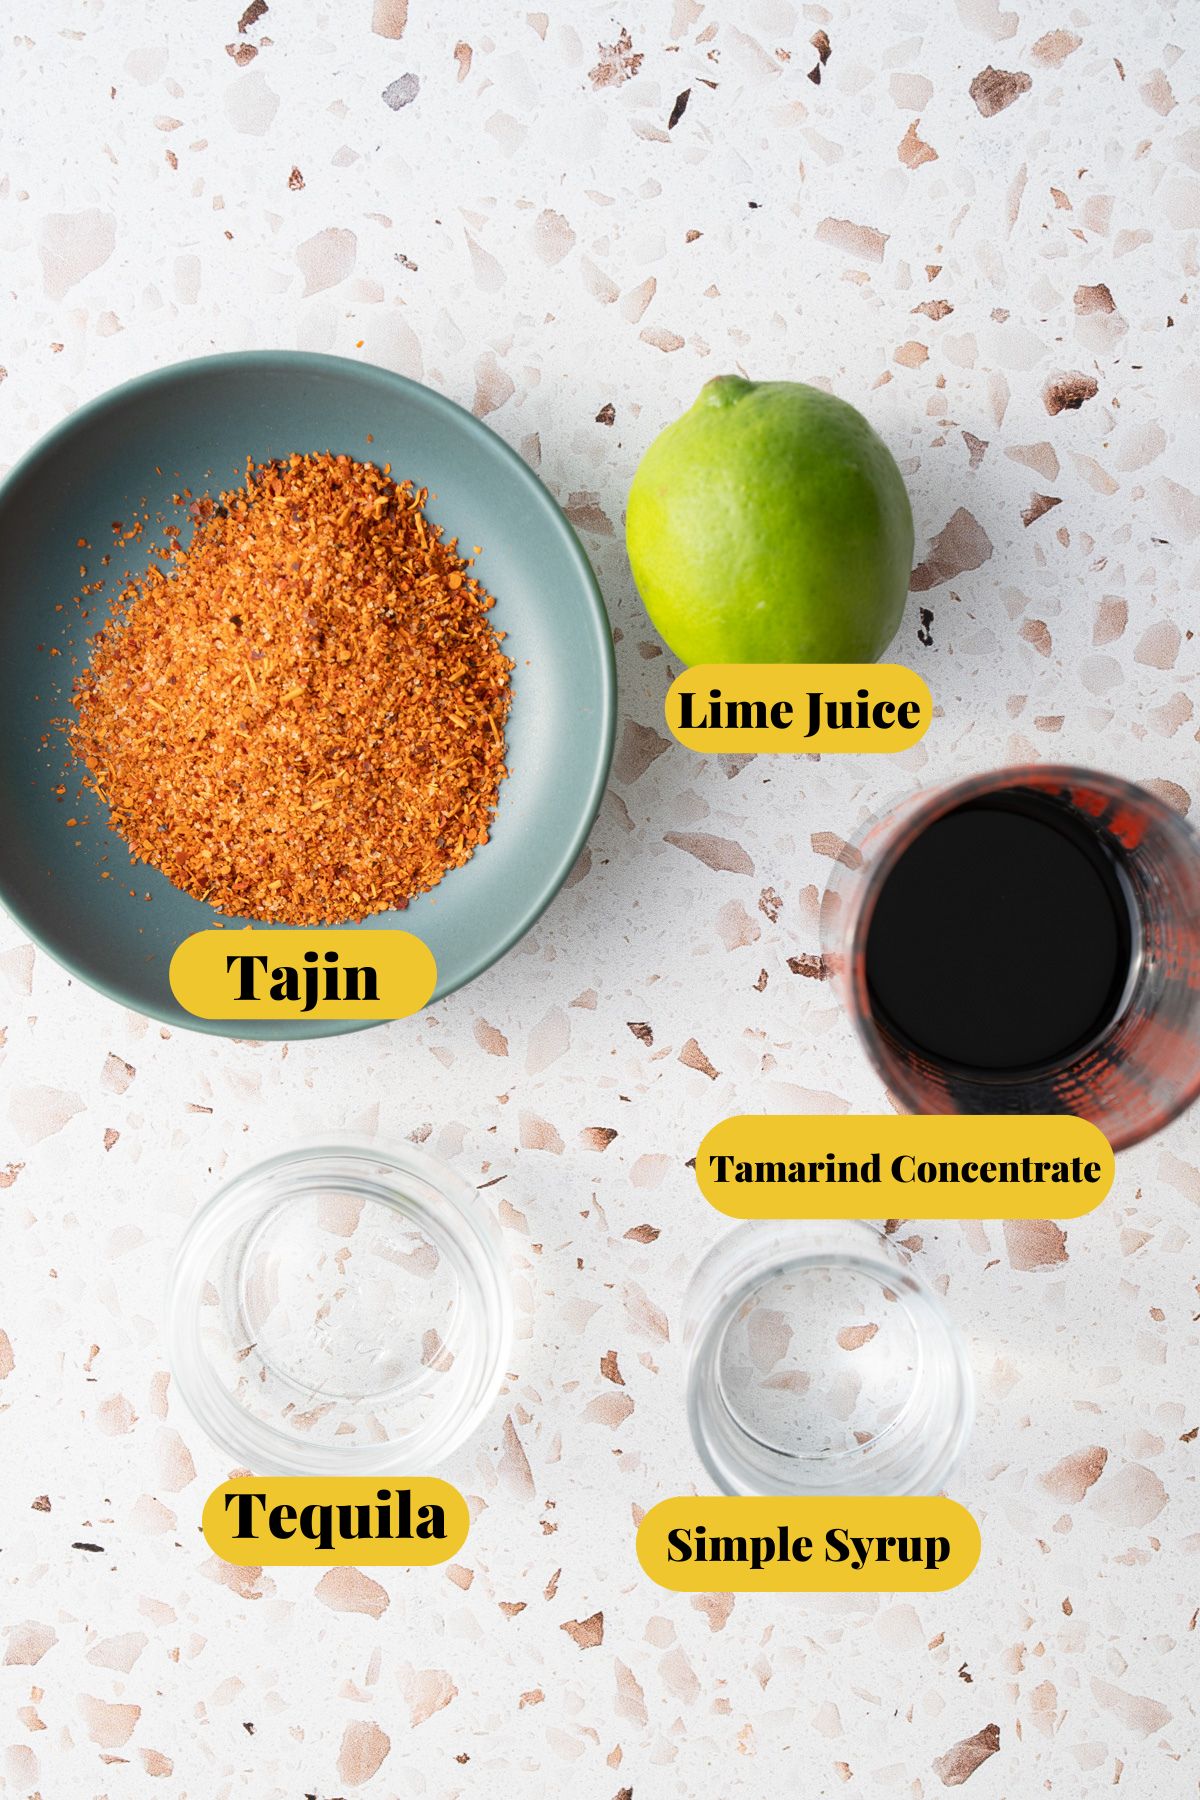 ingredients of tamarind margarita with labels showing which ingredient is which of takin, lime juice, tamarind concentrate, simple syrup, and tequila